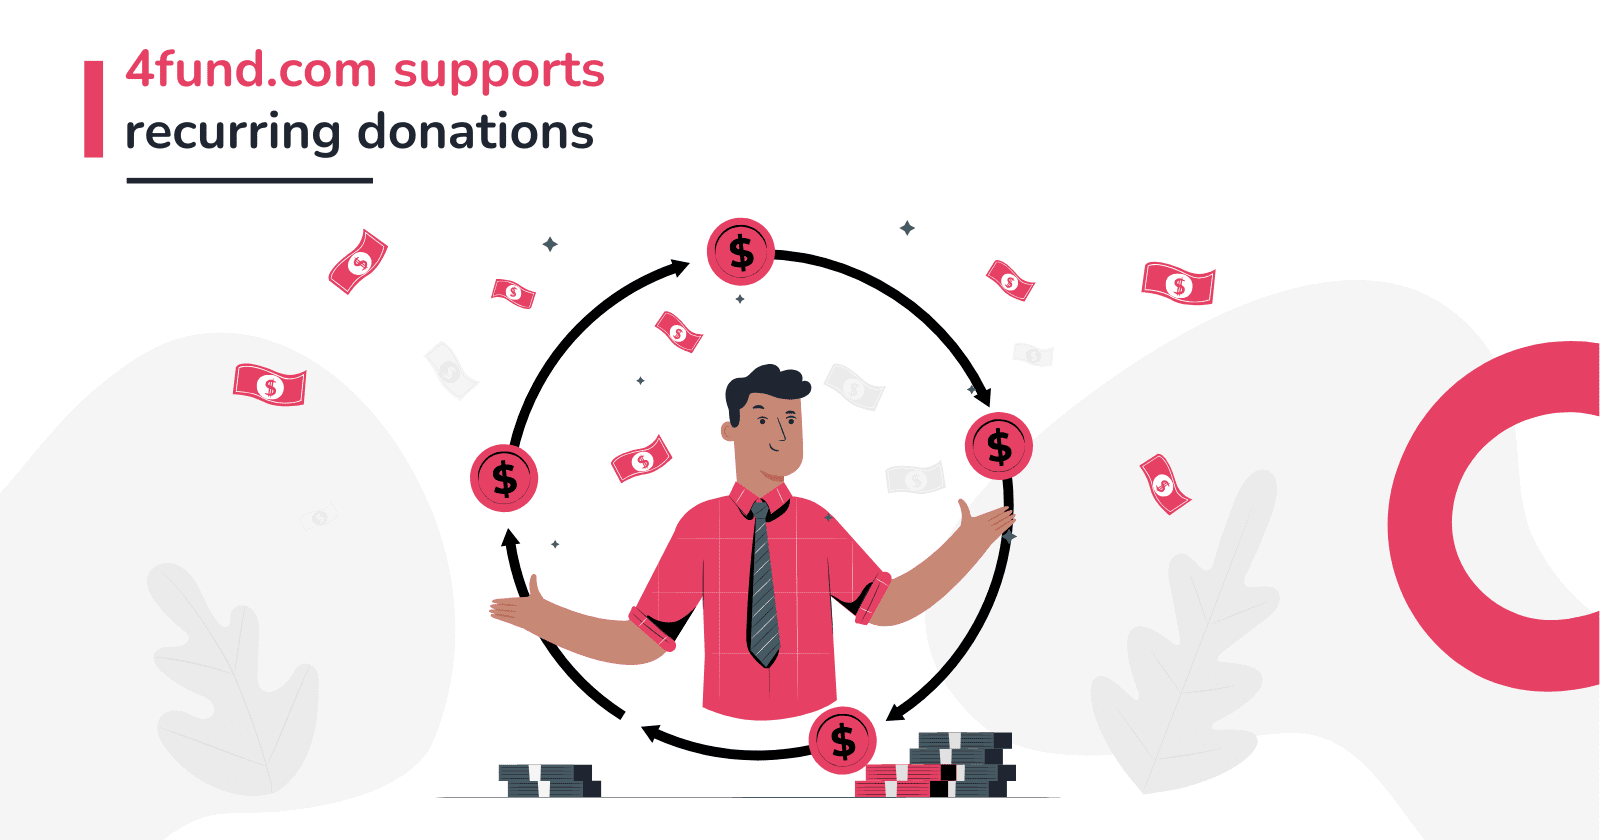 4fund.com supports recurring donations - check out how to use them!